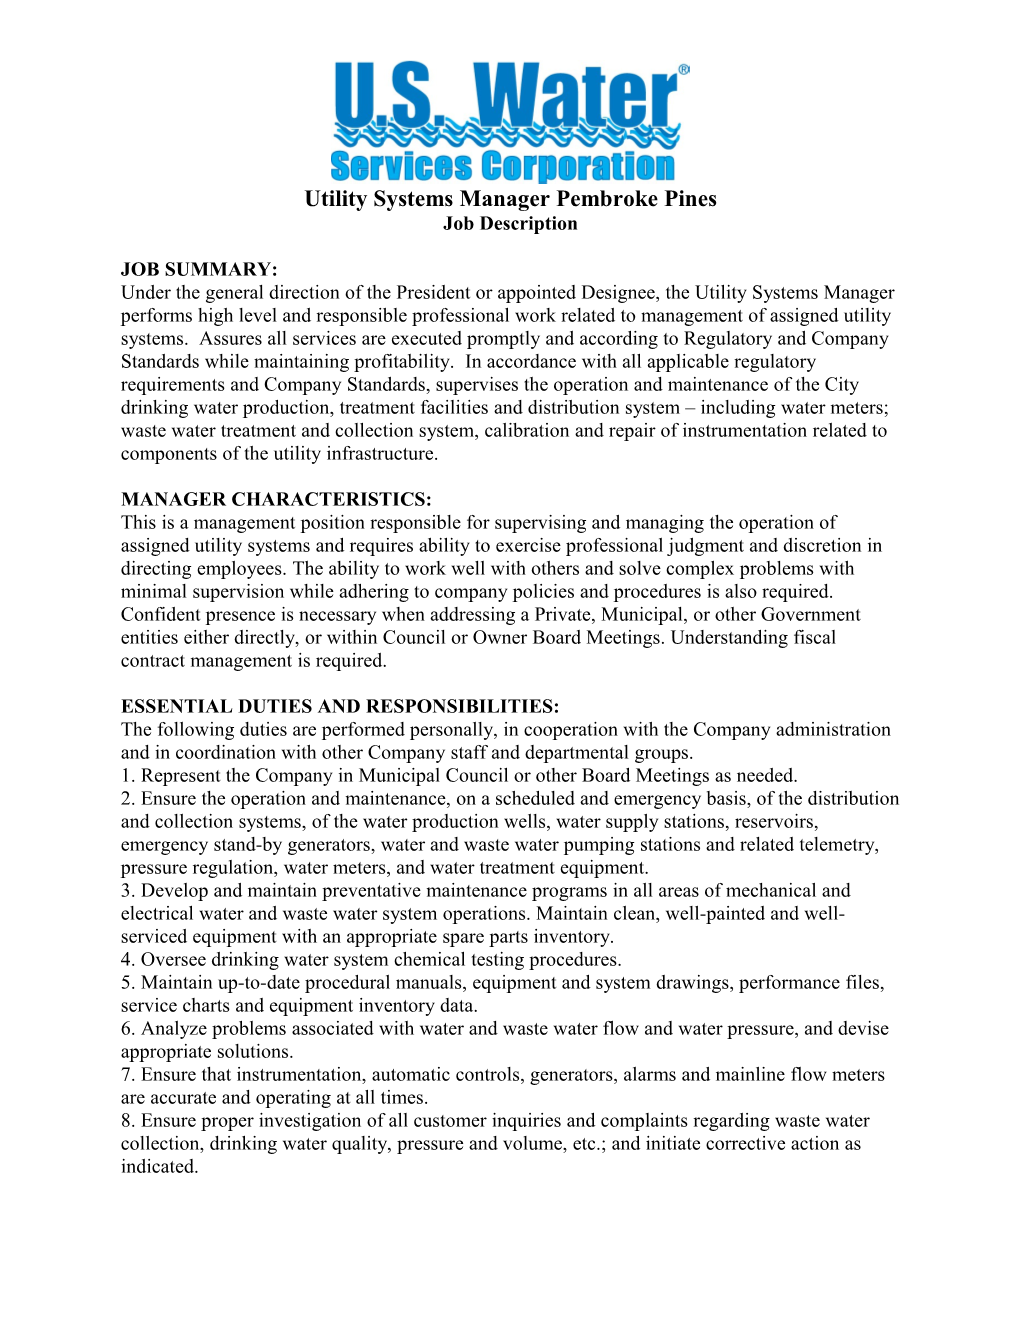 Utility Systems Manager Pembroke Pines